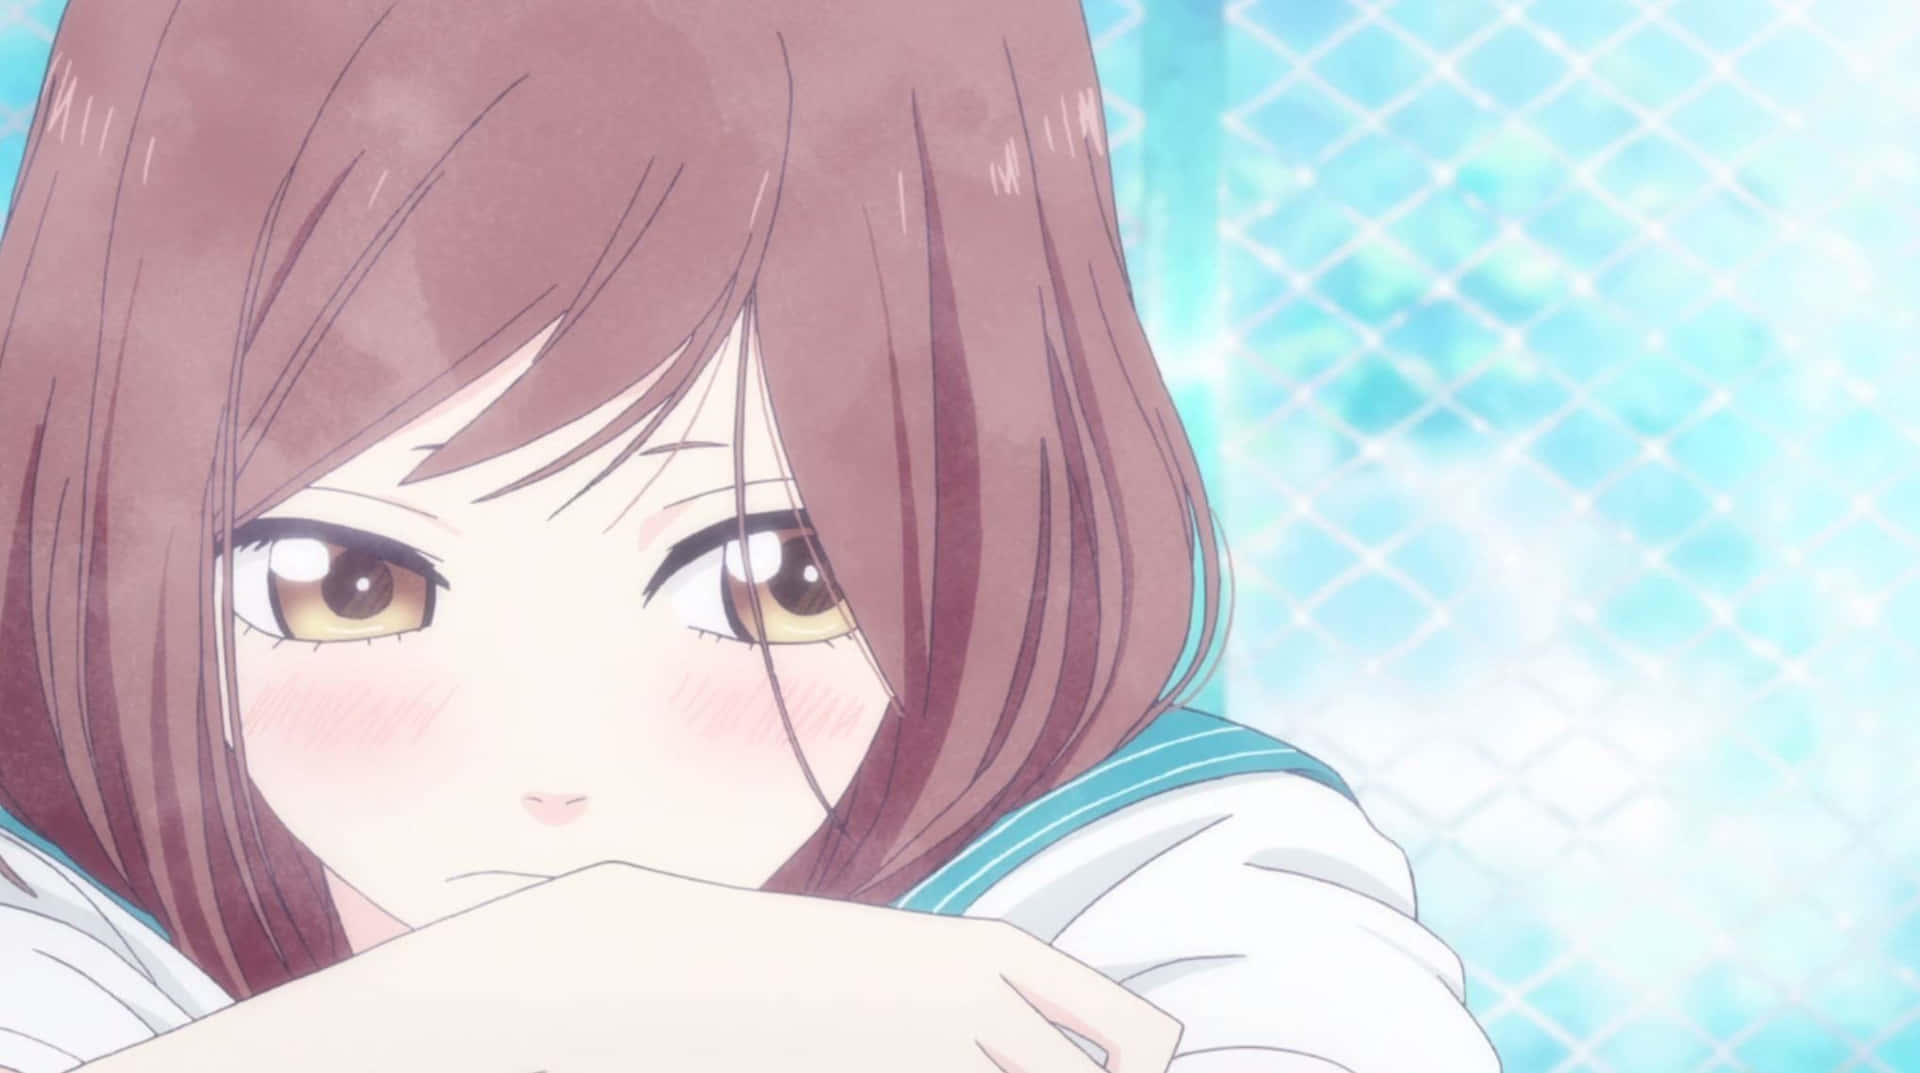 The connections shared, the distances traveled – AO HARU RIDE is a story of love and friendship.